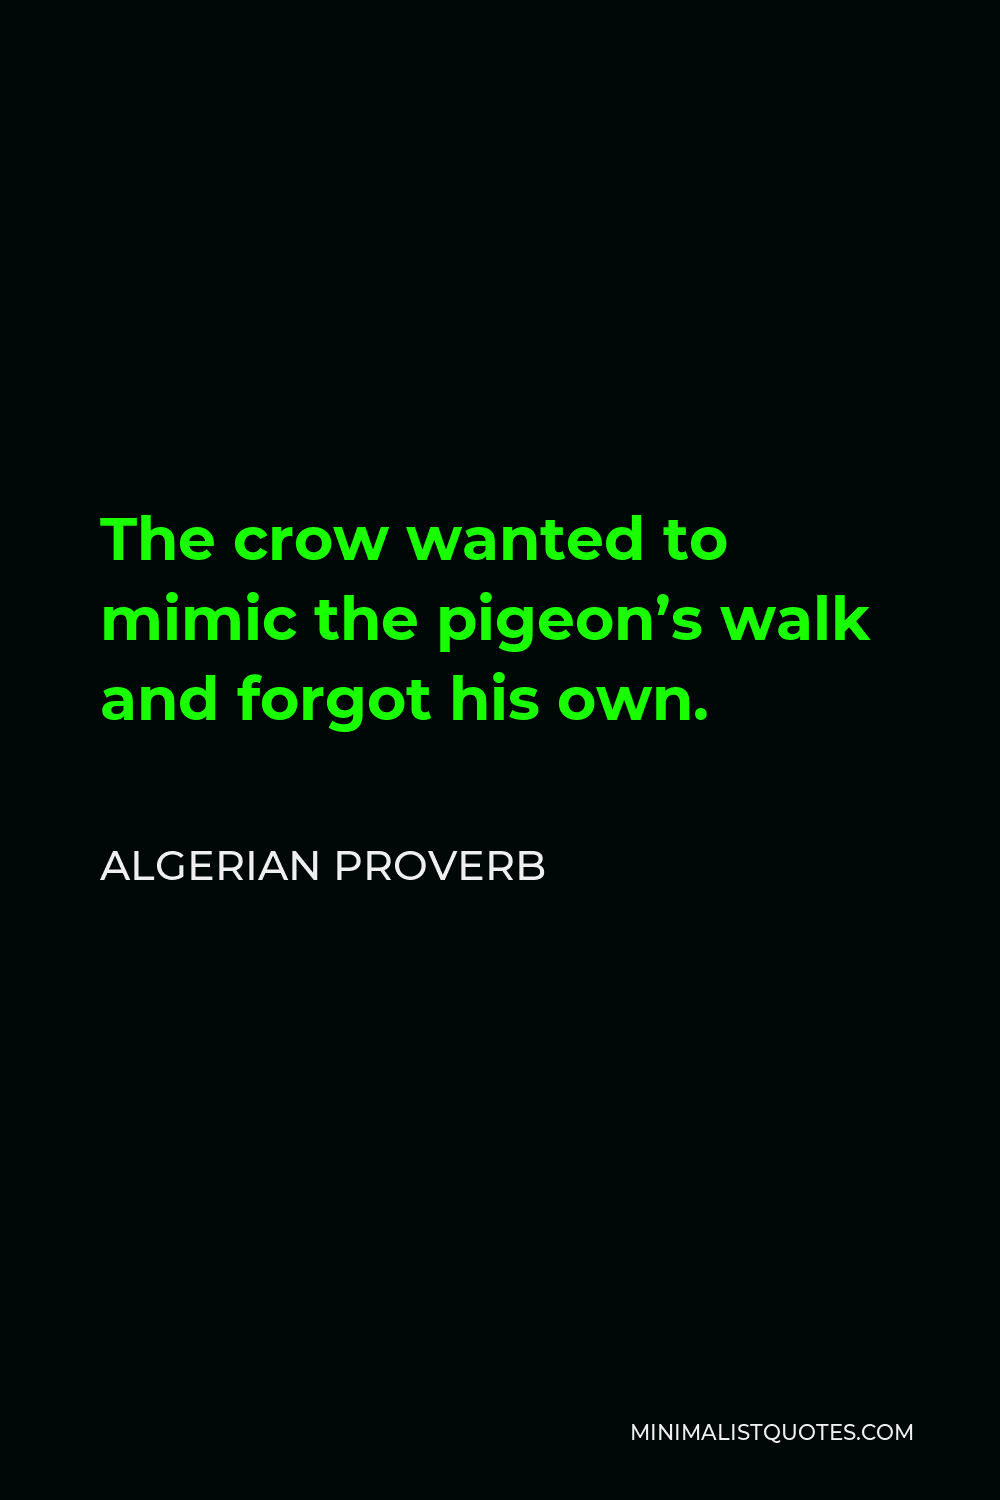 Algerian Proverb Quote - The crow wanted to mimic the pigeon’s walk and forgot his own.